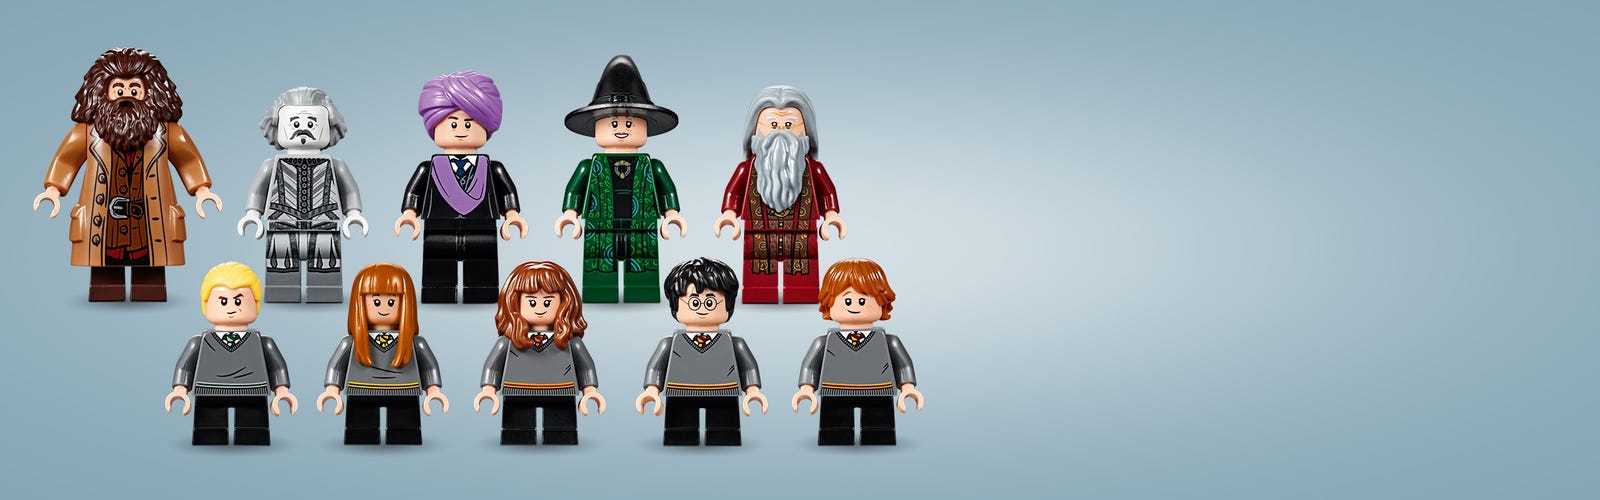 LEGO Harry Potter Hogwarts Great Hall 75954 Building Kit and Magic Castle  Toy, Fantasy Creatures, Hermione Granger, Draco Malfoy and Hagrid (878